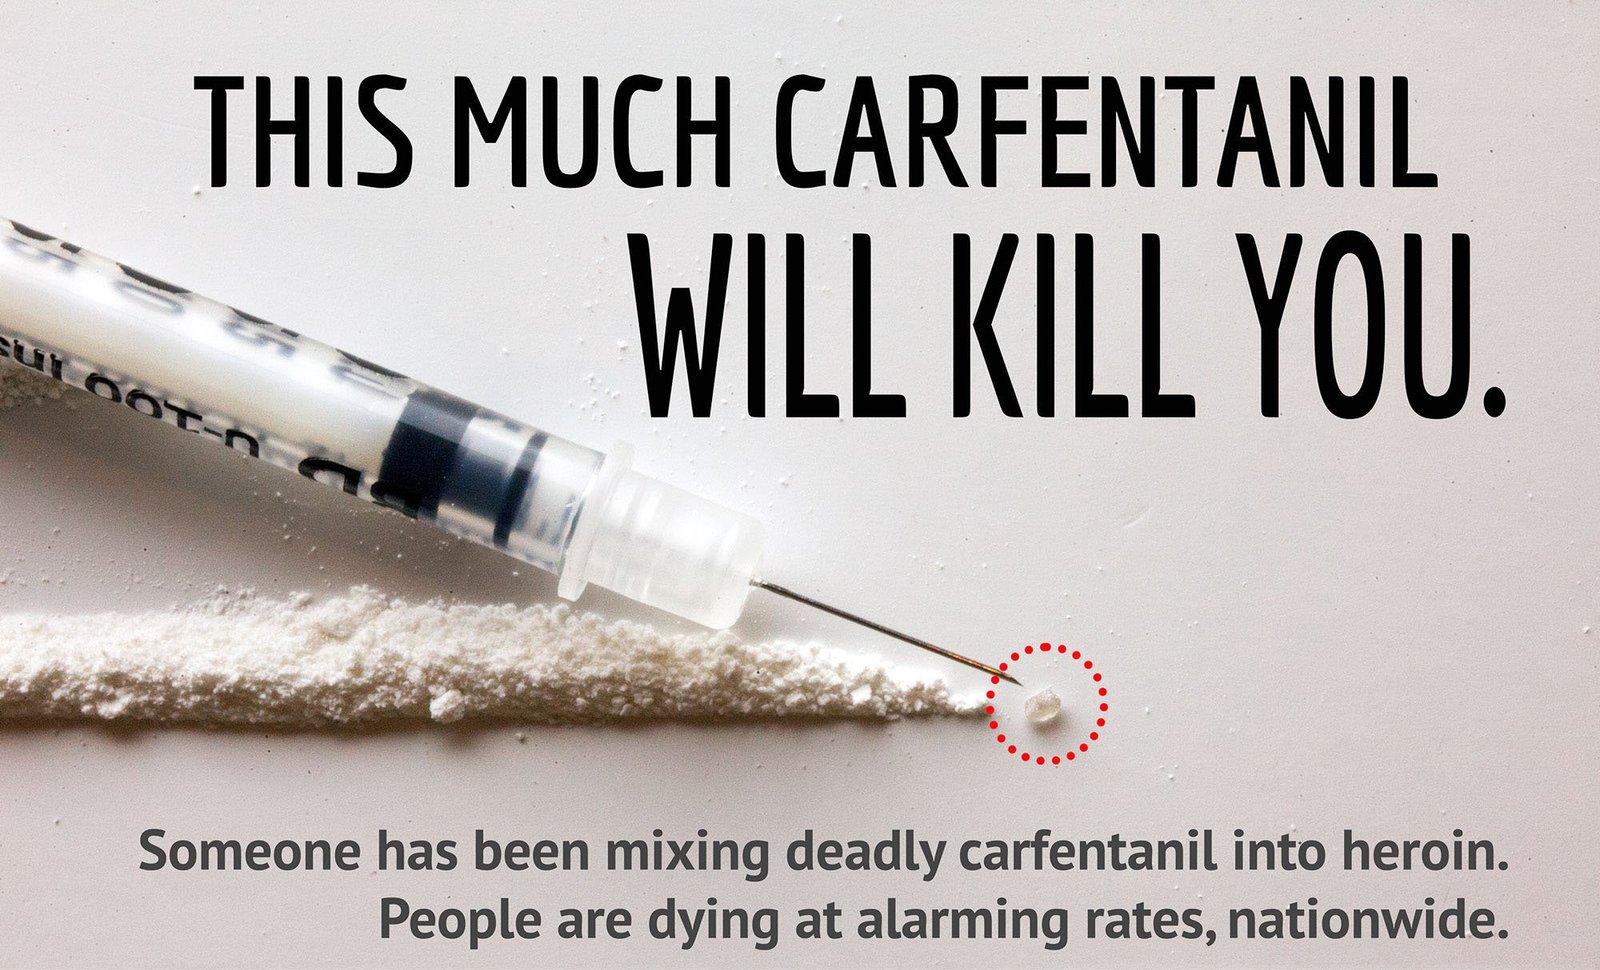 This much Carfentanil will kill you.